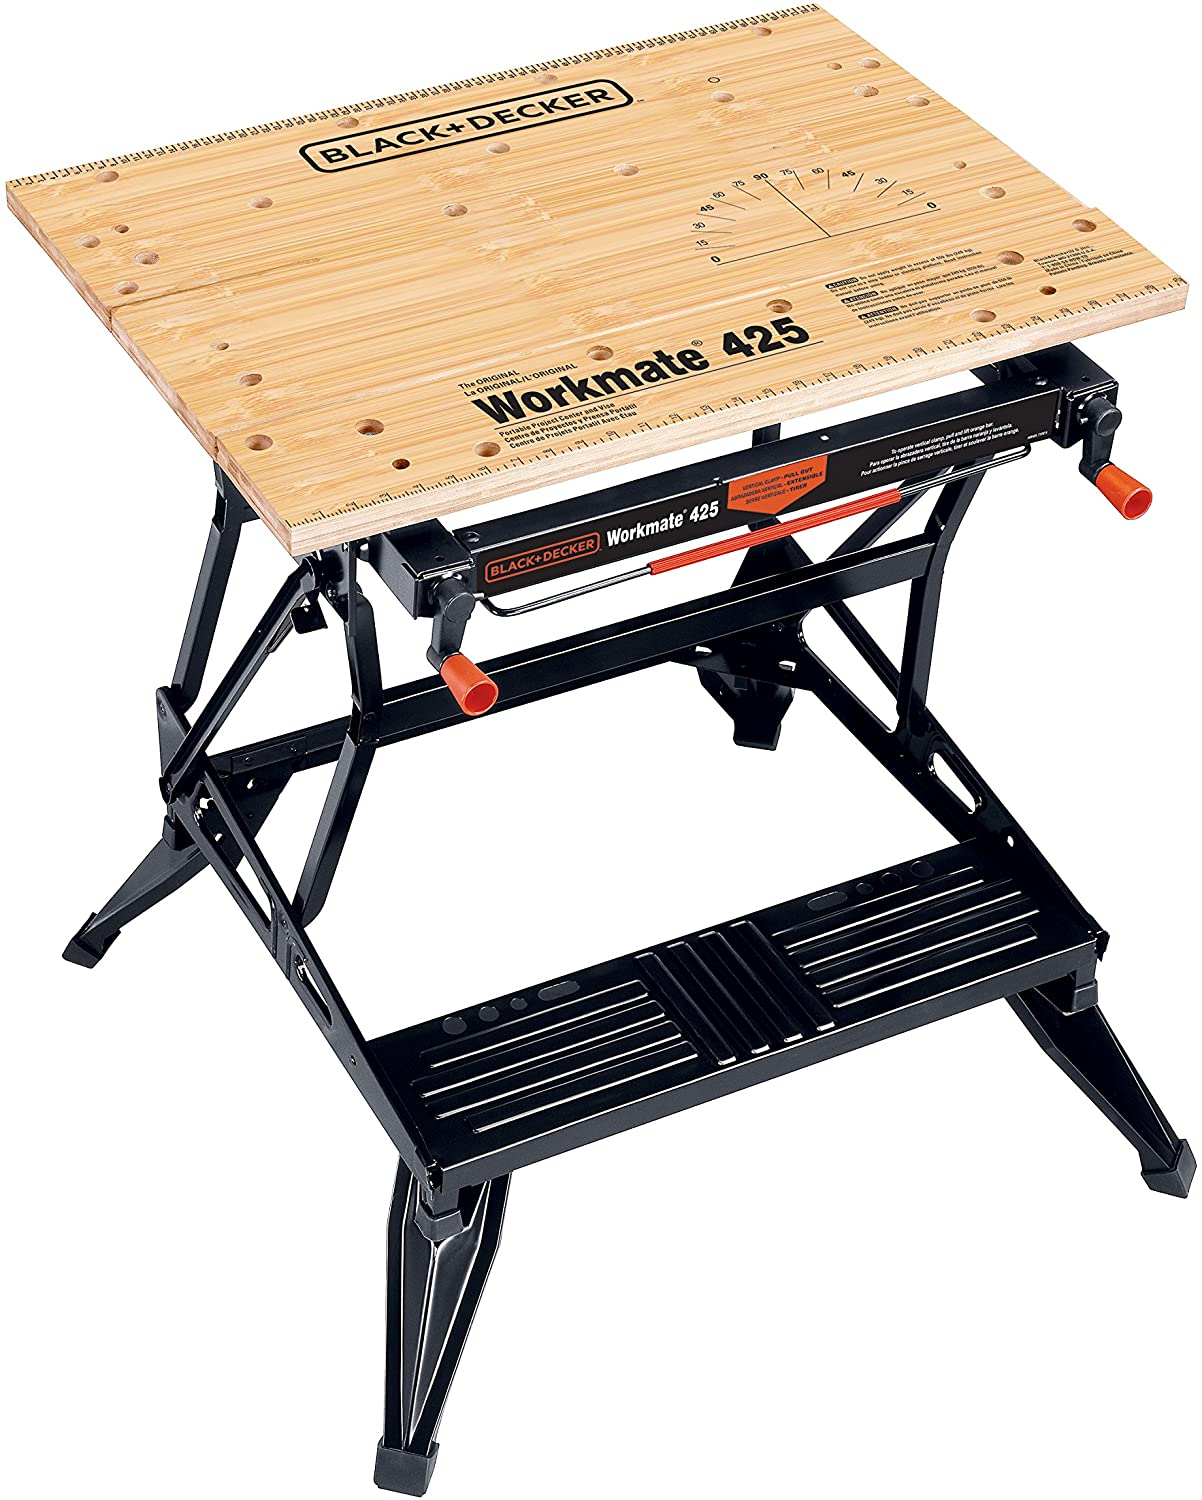 <strong>6. BLACK+DECKER Workmate Portable Workbench</strong>